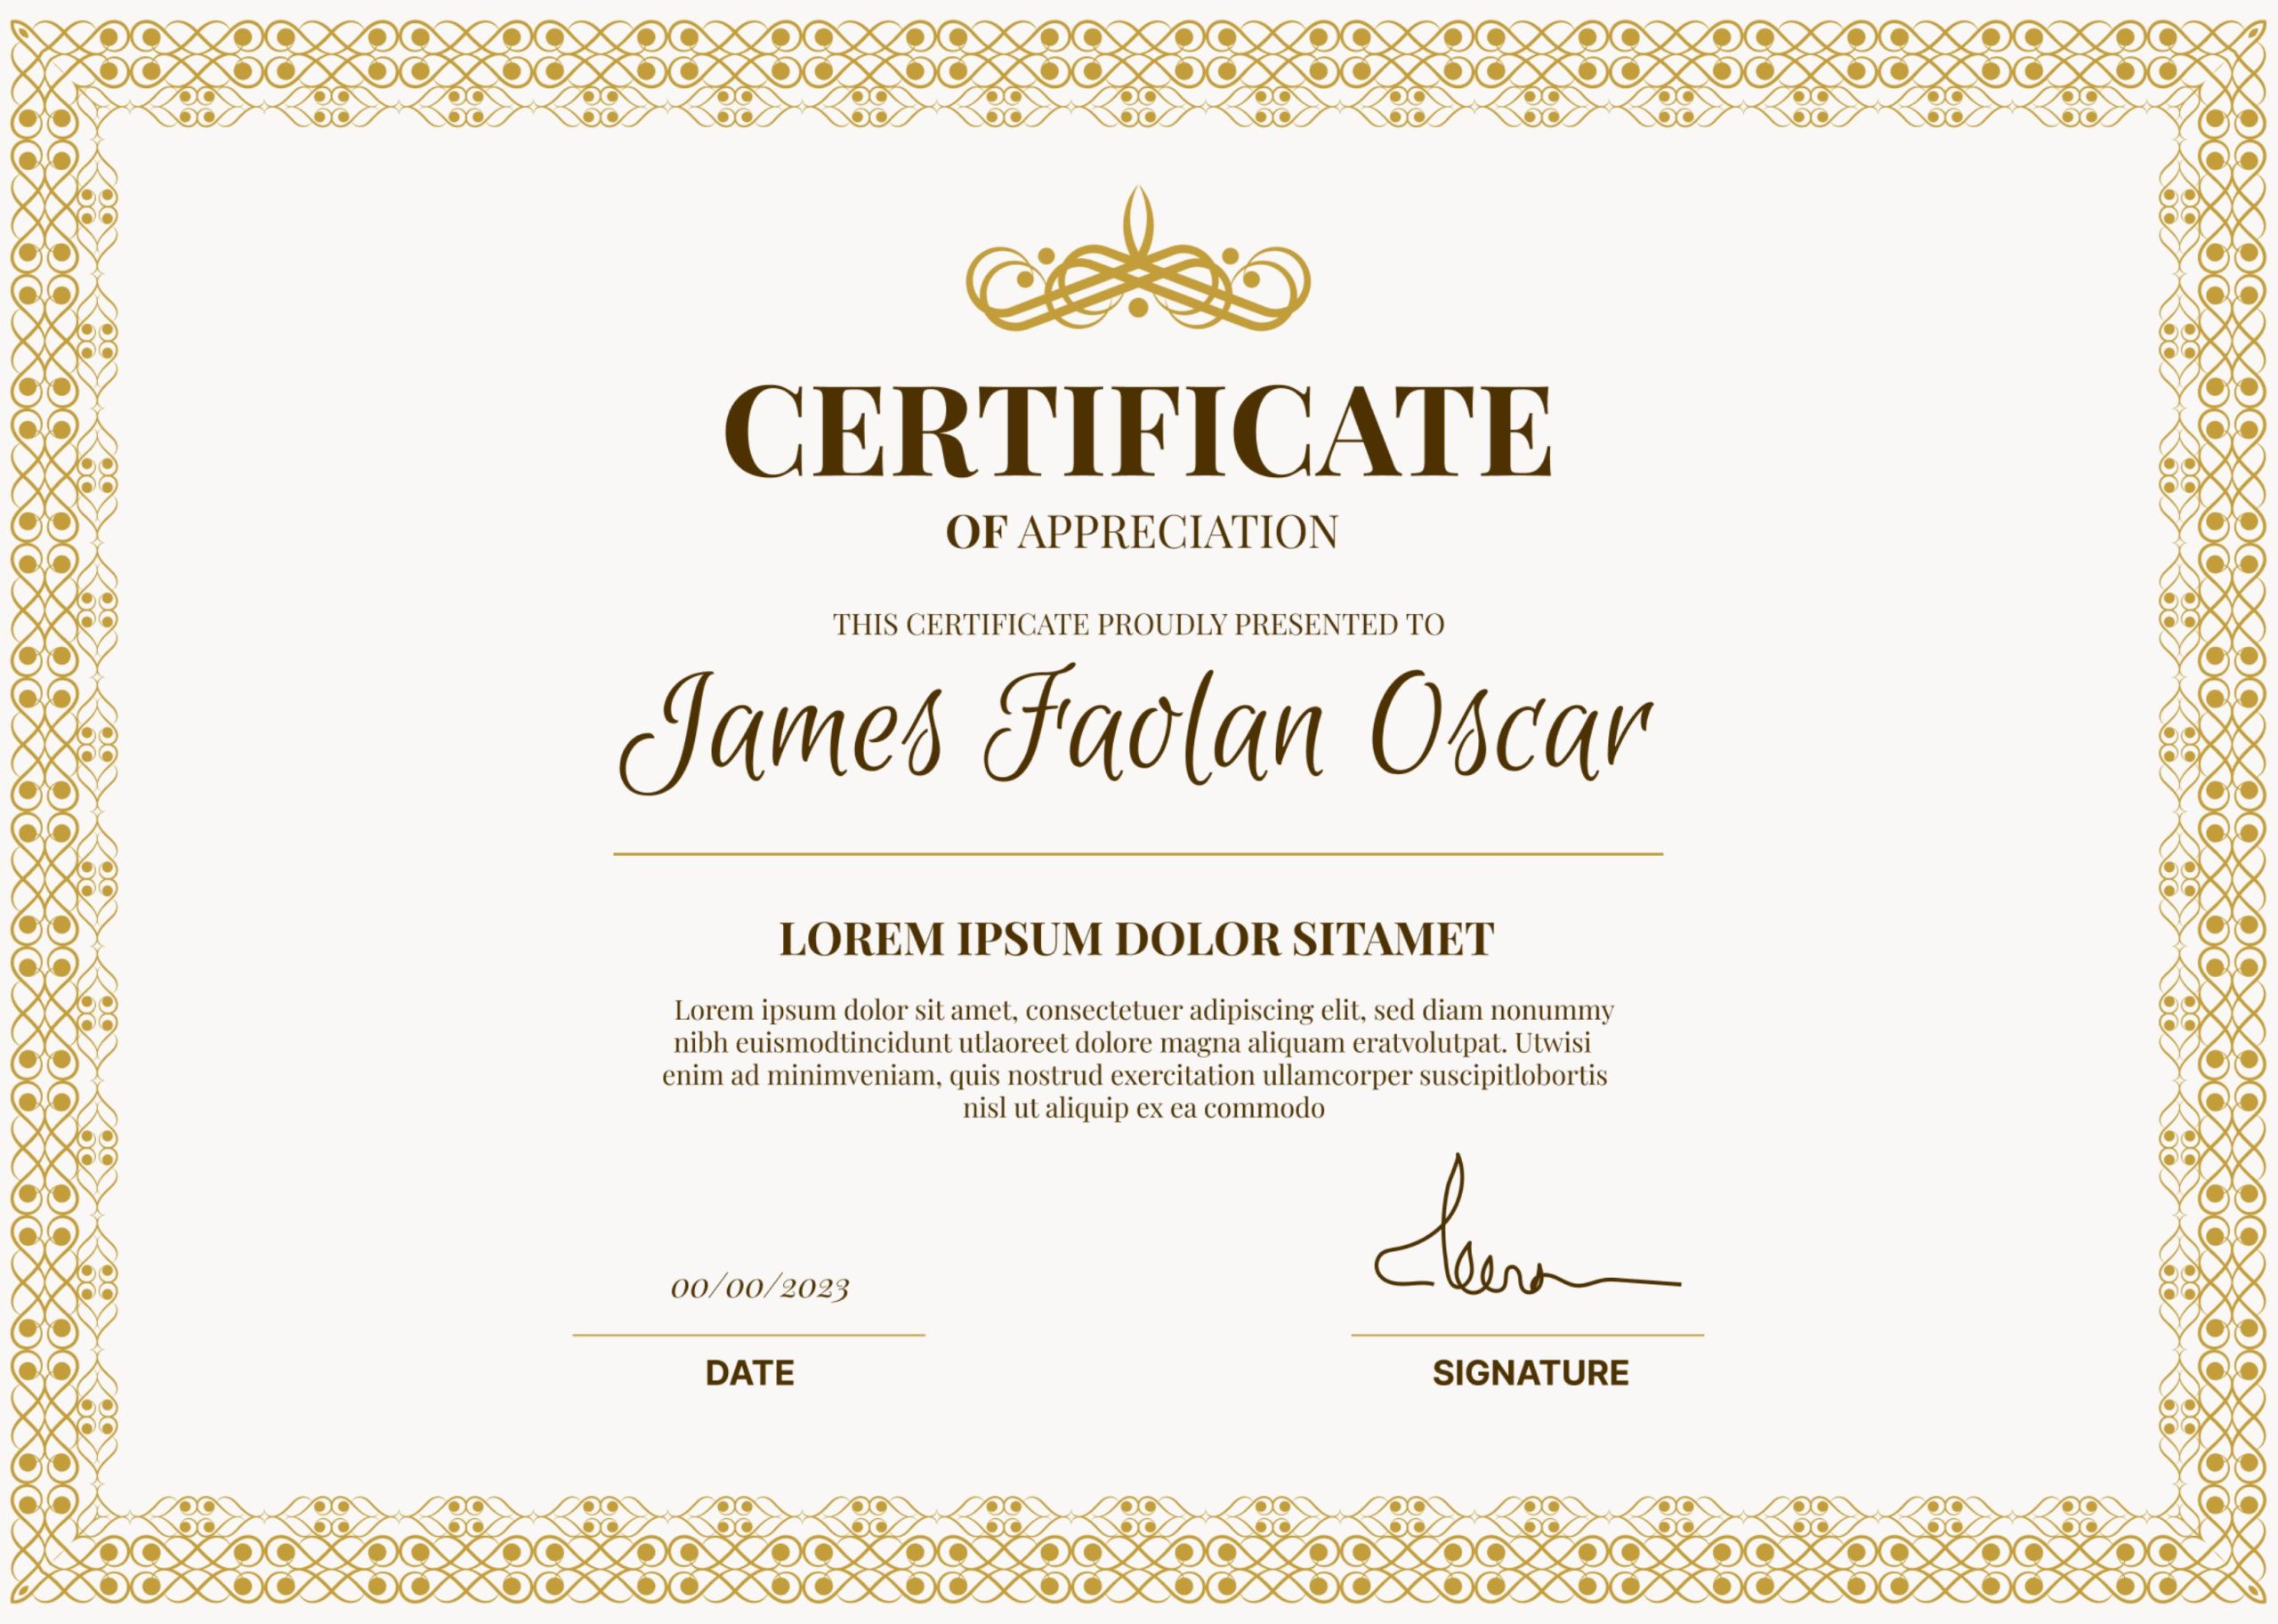 Golden Ornate Classical Certificate of Appreciation Examples